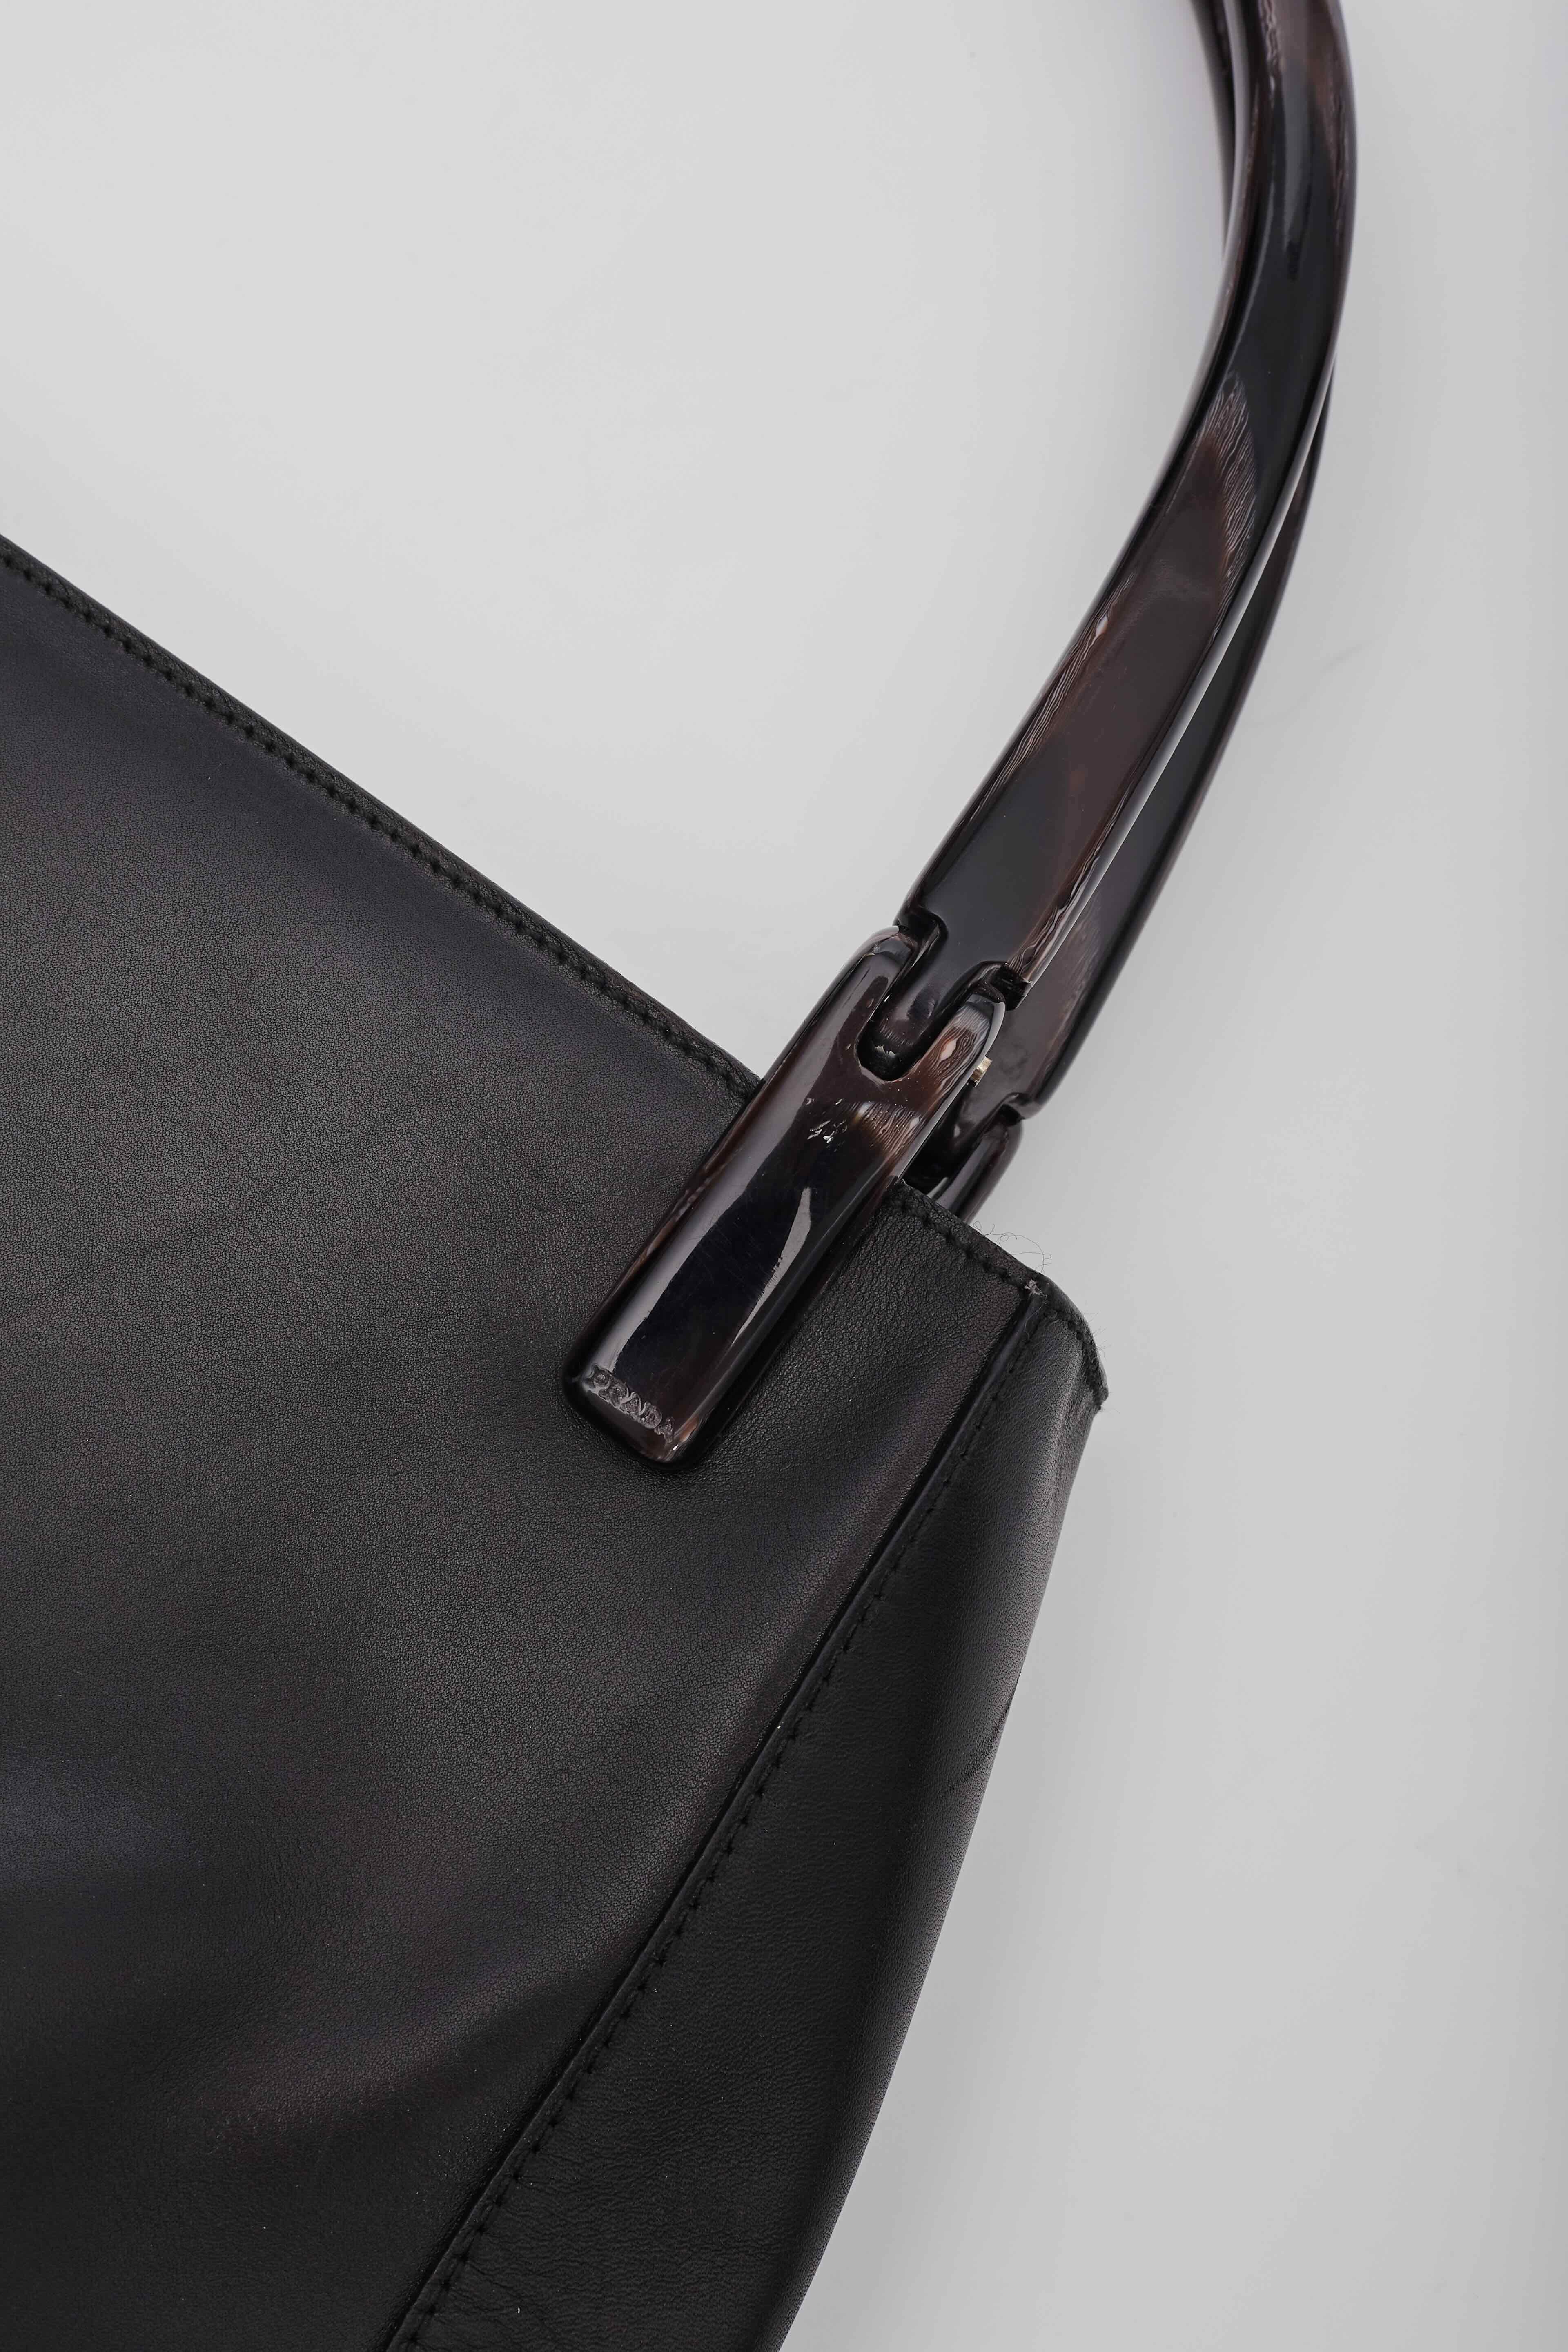 Prada Black Leather Tall Acrylic Handle Tote Bag In Good Condition For Sale In Montreal, Quebec